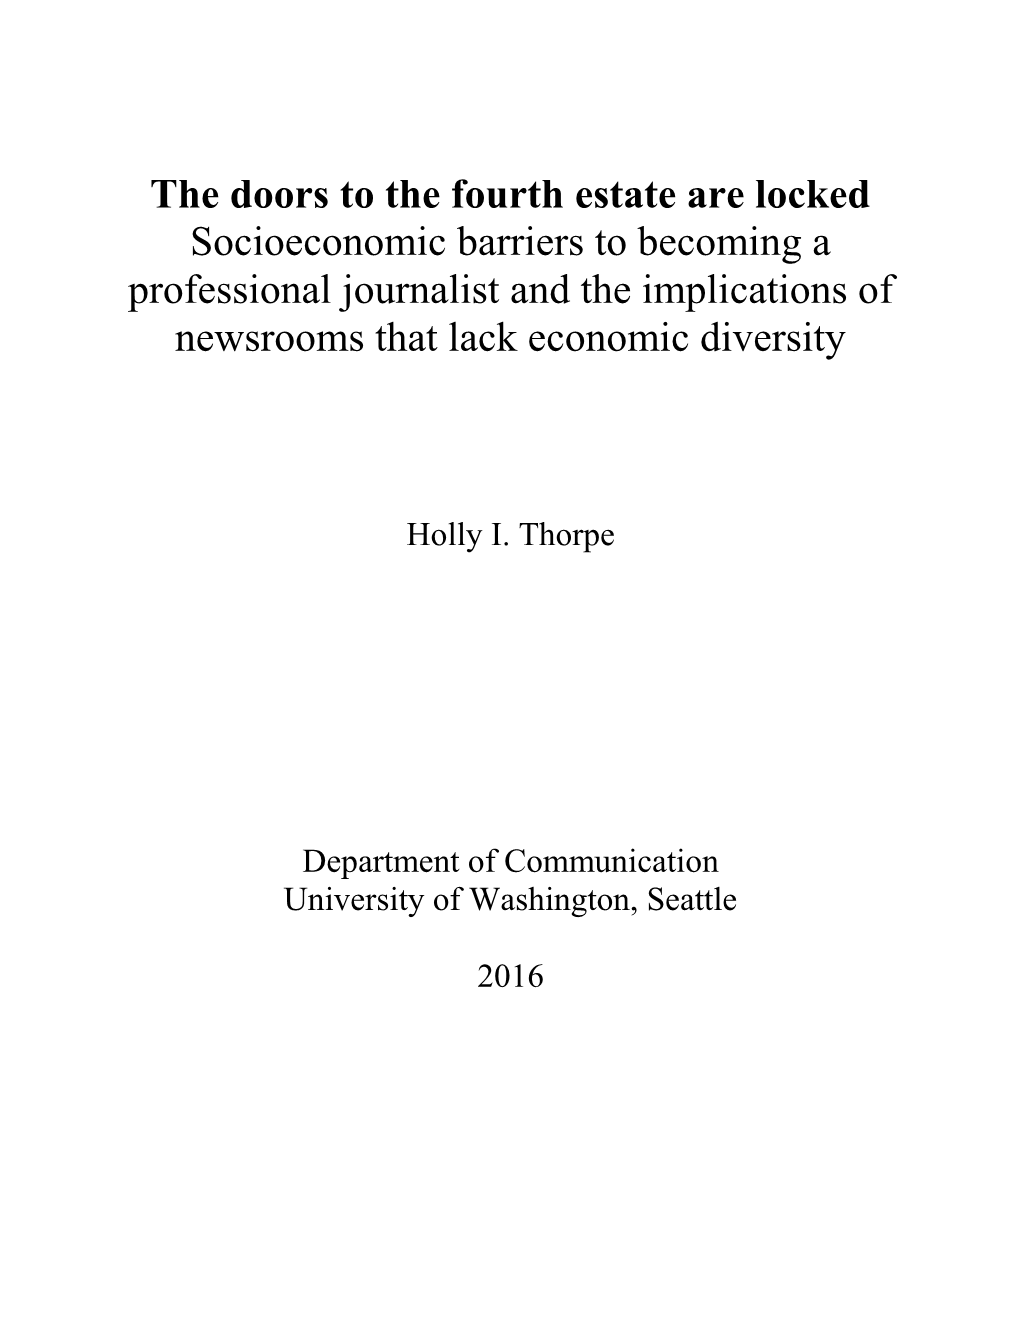 The Doors to the Fourth Estate Are Locked Socioeconomic Barriers to Becoming a Professional Journalist and the Implications of Newsrooms That Lack Economic Diversity